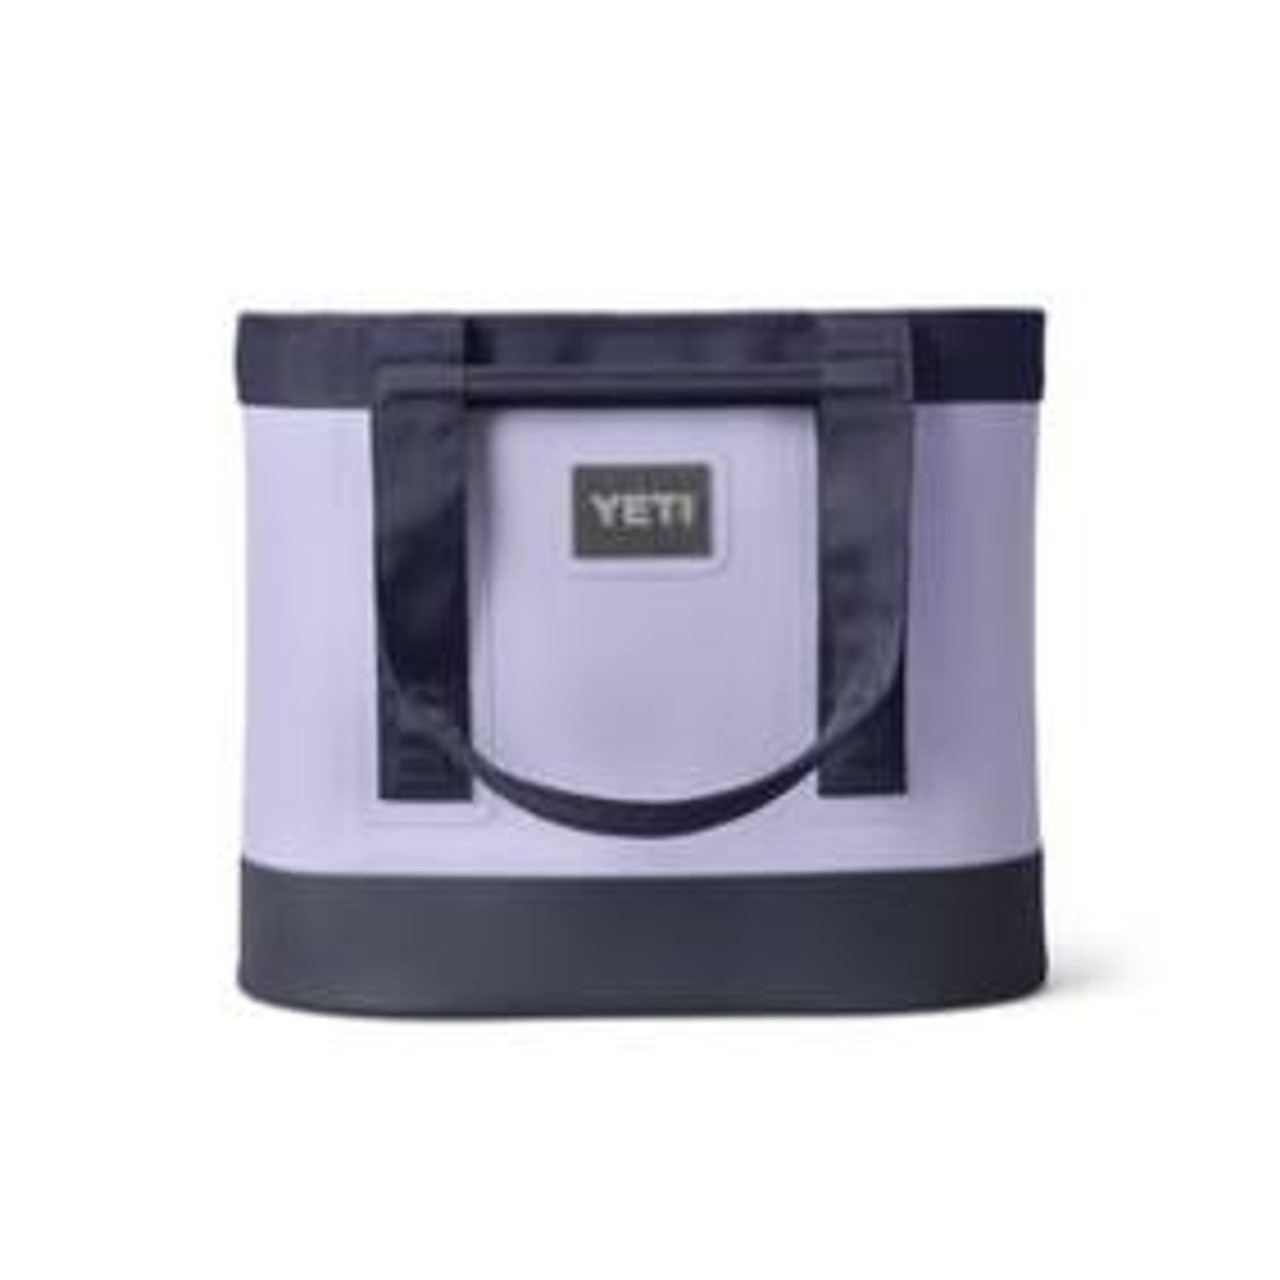 https://cdn11.bigcommerce.com/s-d4f5hm3/images/stencil/1280x1280/products/65635/169160/Yeti-Camino-Carryall-35-2-0-Cosmic-Lilac-888830250686_image2__44059.1700570769.jpg?c=2